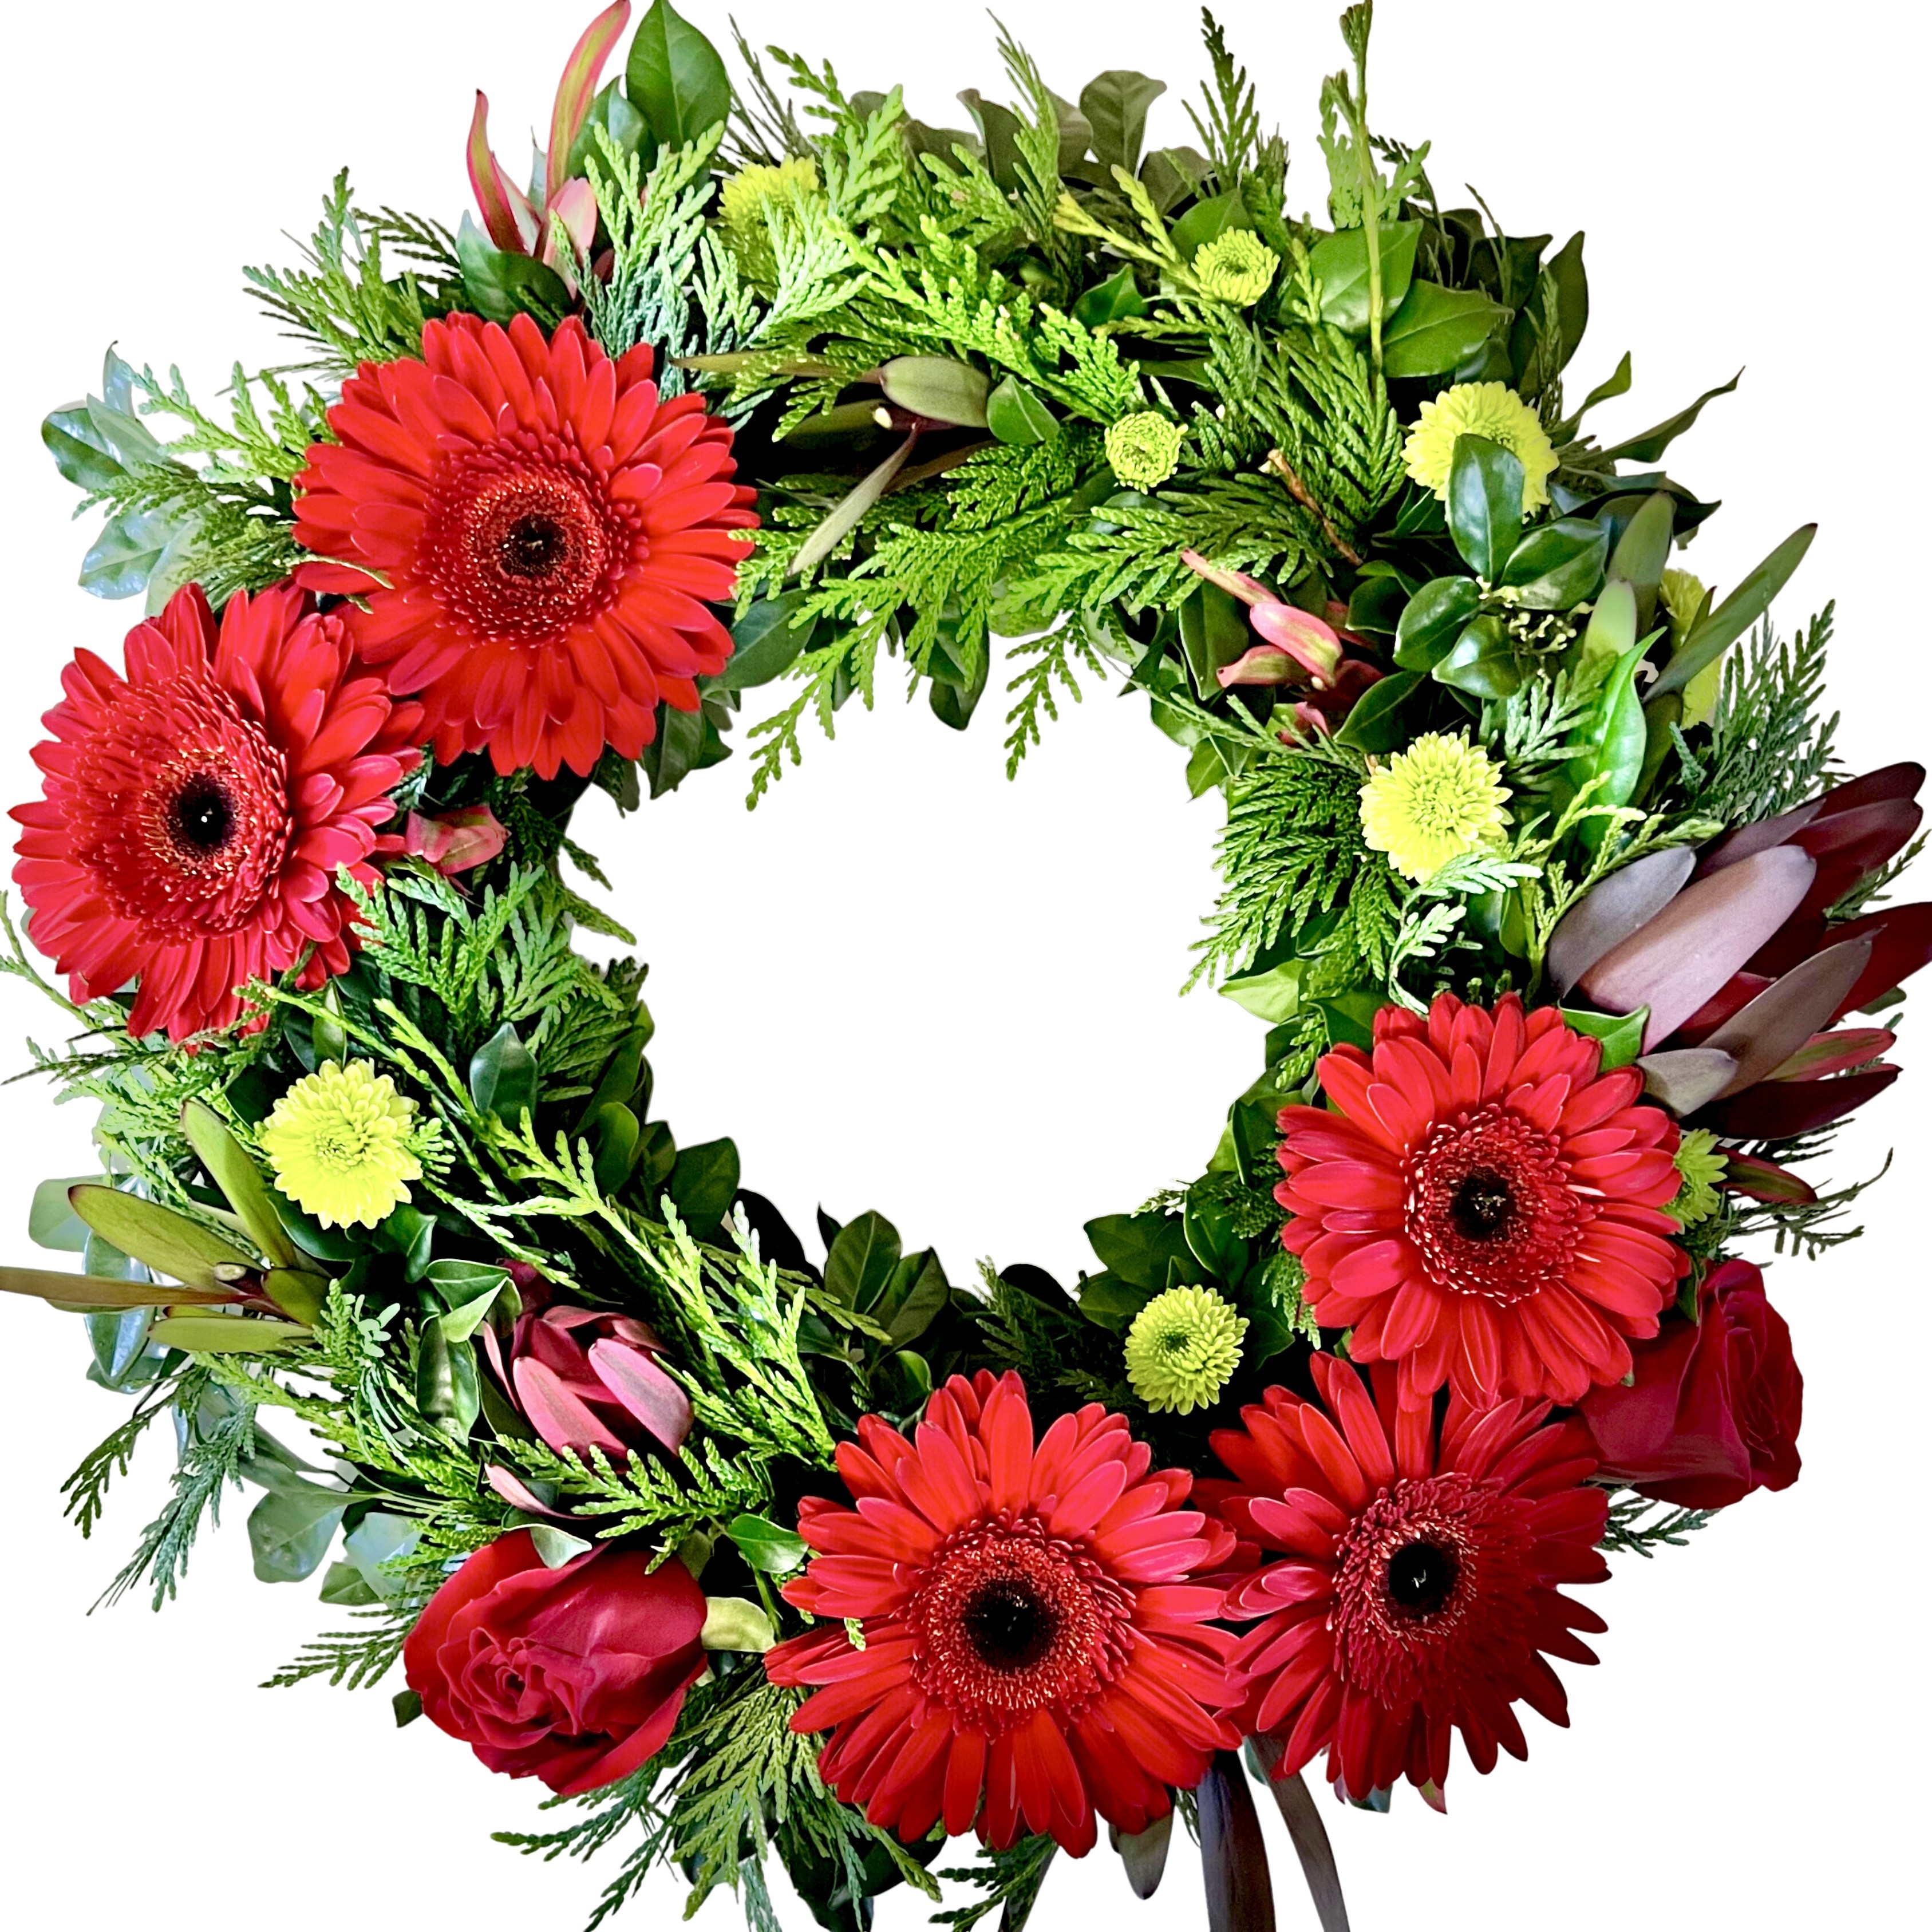 Wreath - Seasonal Blooms in Red and Green